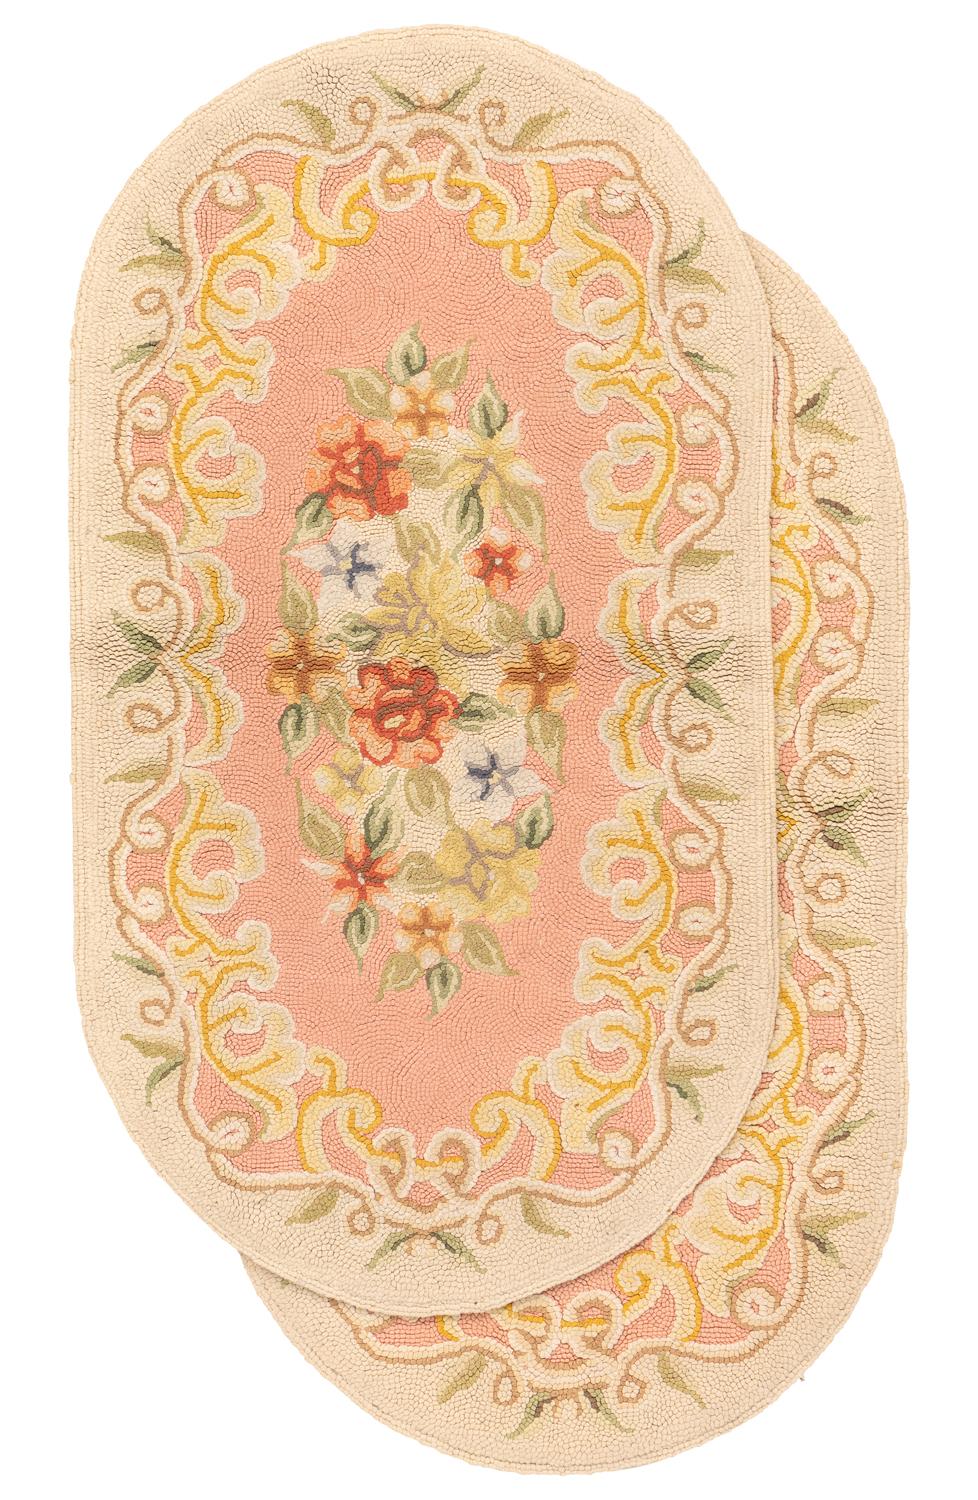 This is a pair of antique American hooked rugs woven during the beginning of the 20th century circa 1900 and measures 108 x 60 CM in size. These oval-shaped rugs have a floral design with blossoming flowers set on a delicate pink background color.